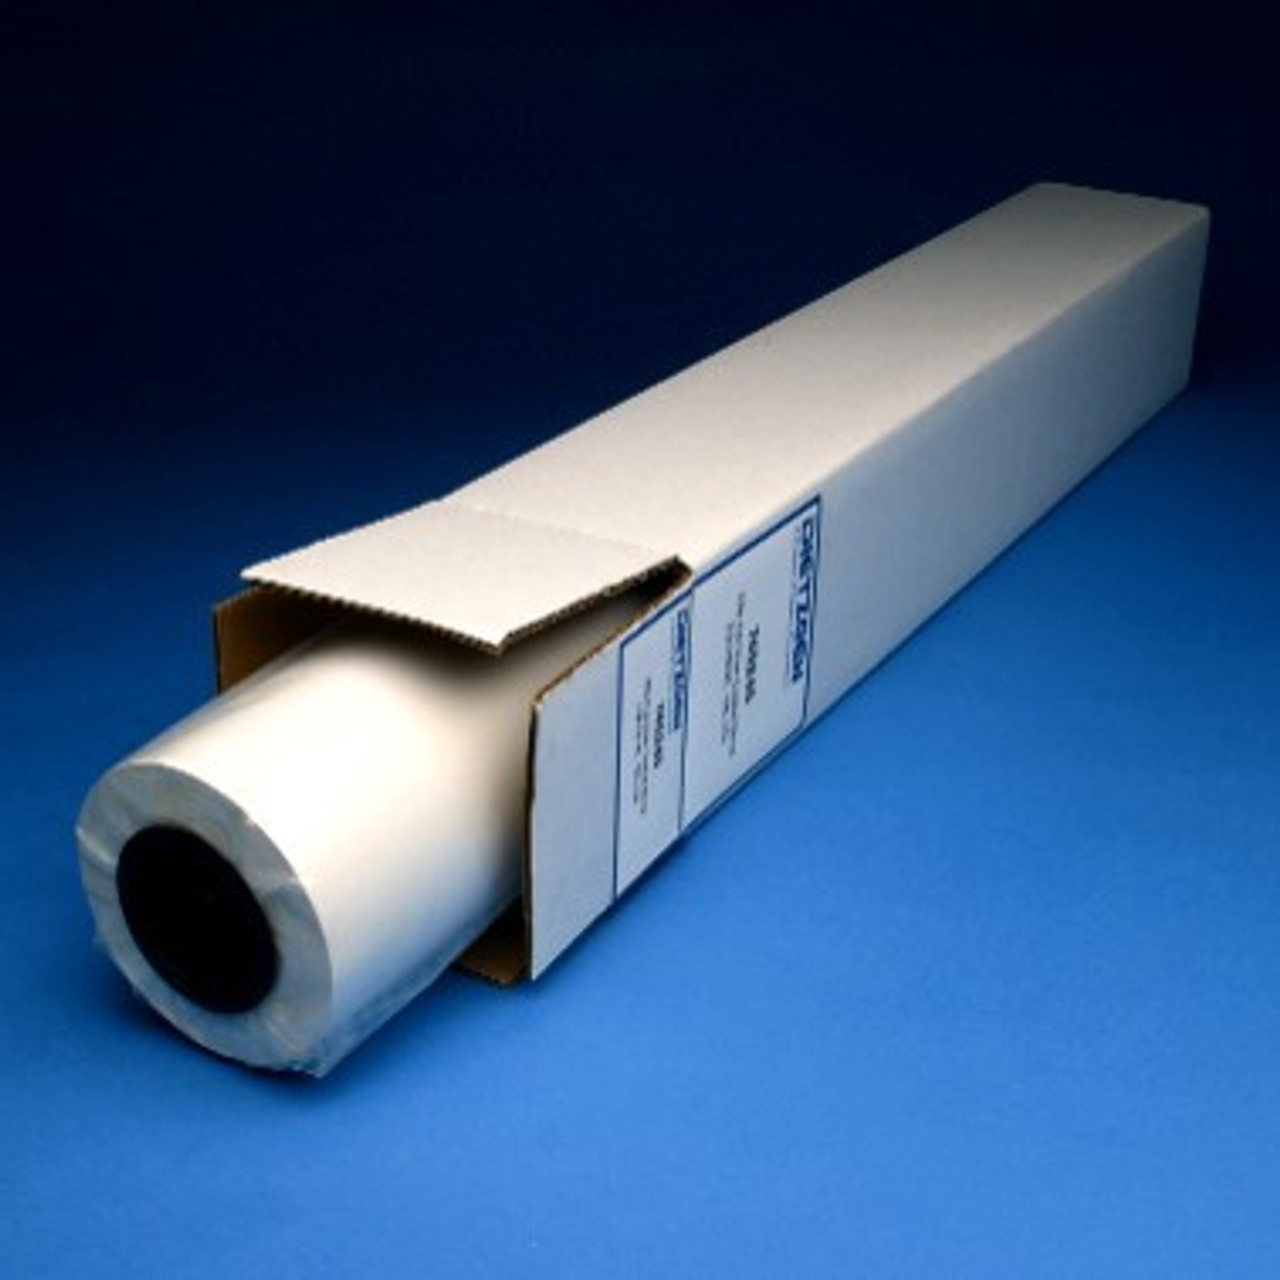 24'' x 150' Rolls - 20 lb Blue Tinted/Colored Bond Plotter Paper on 2